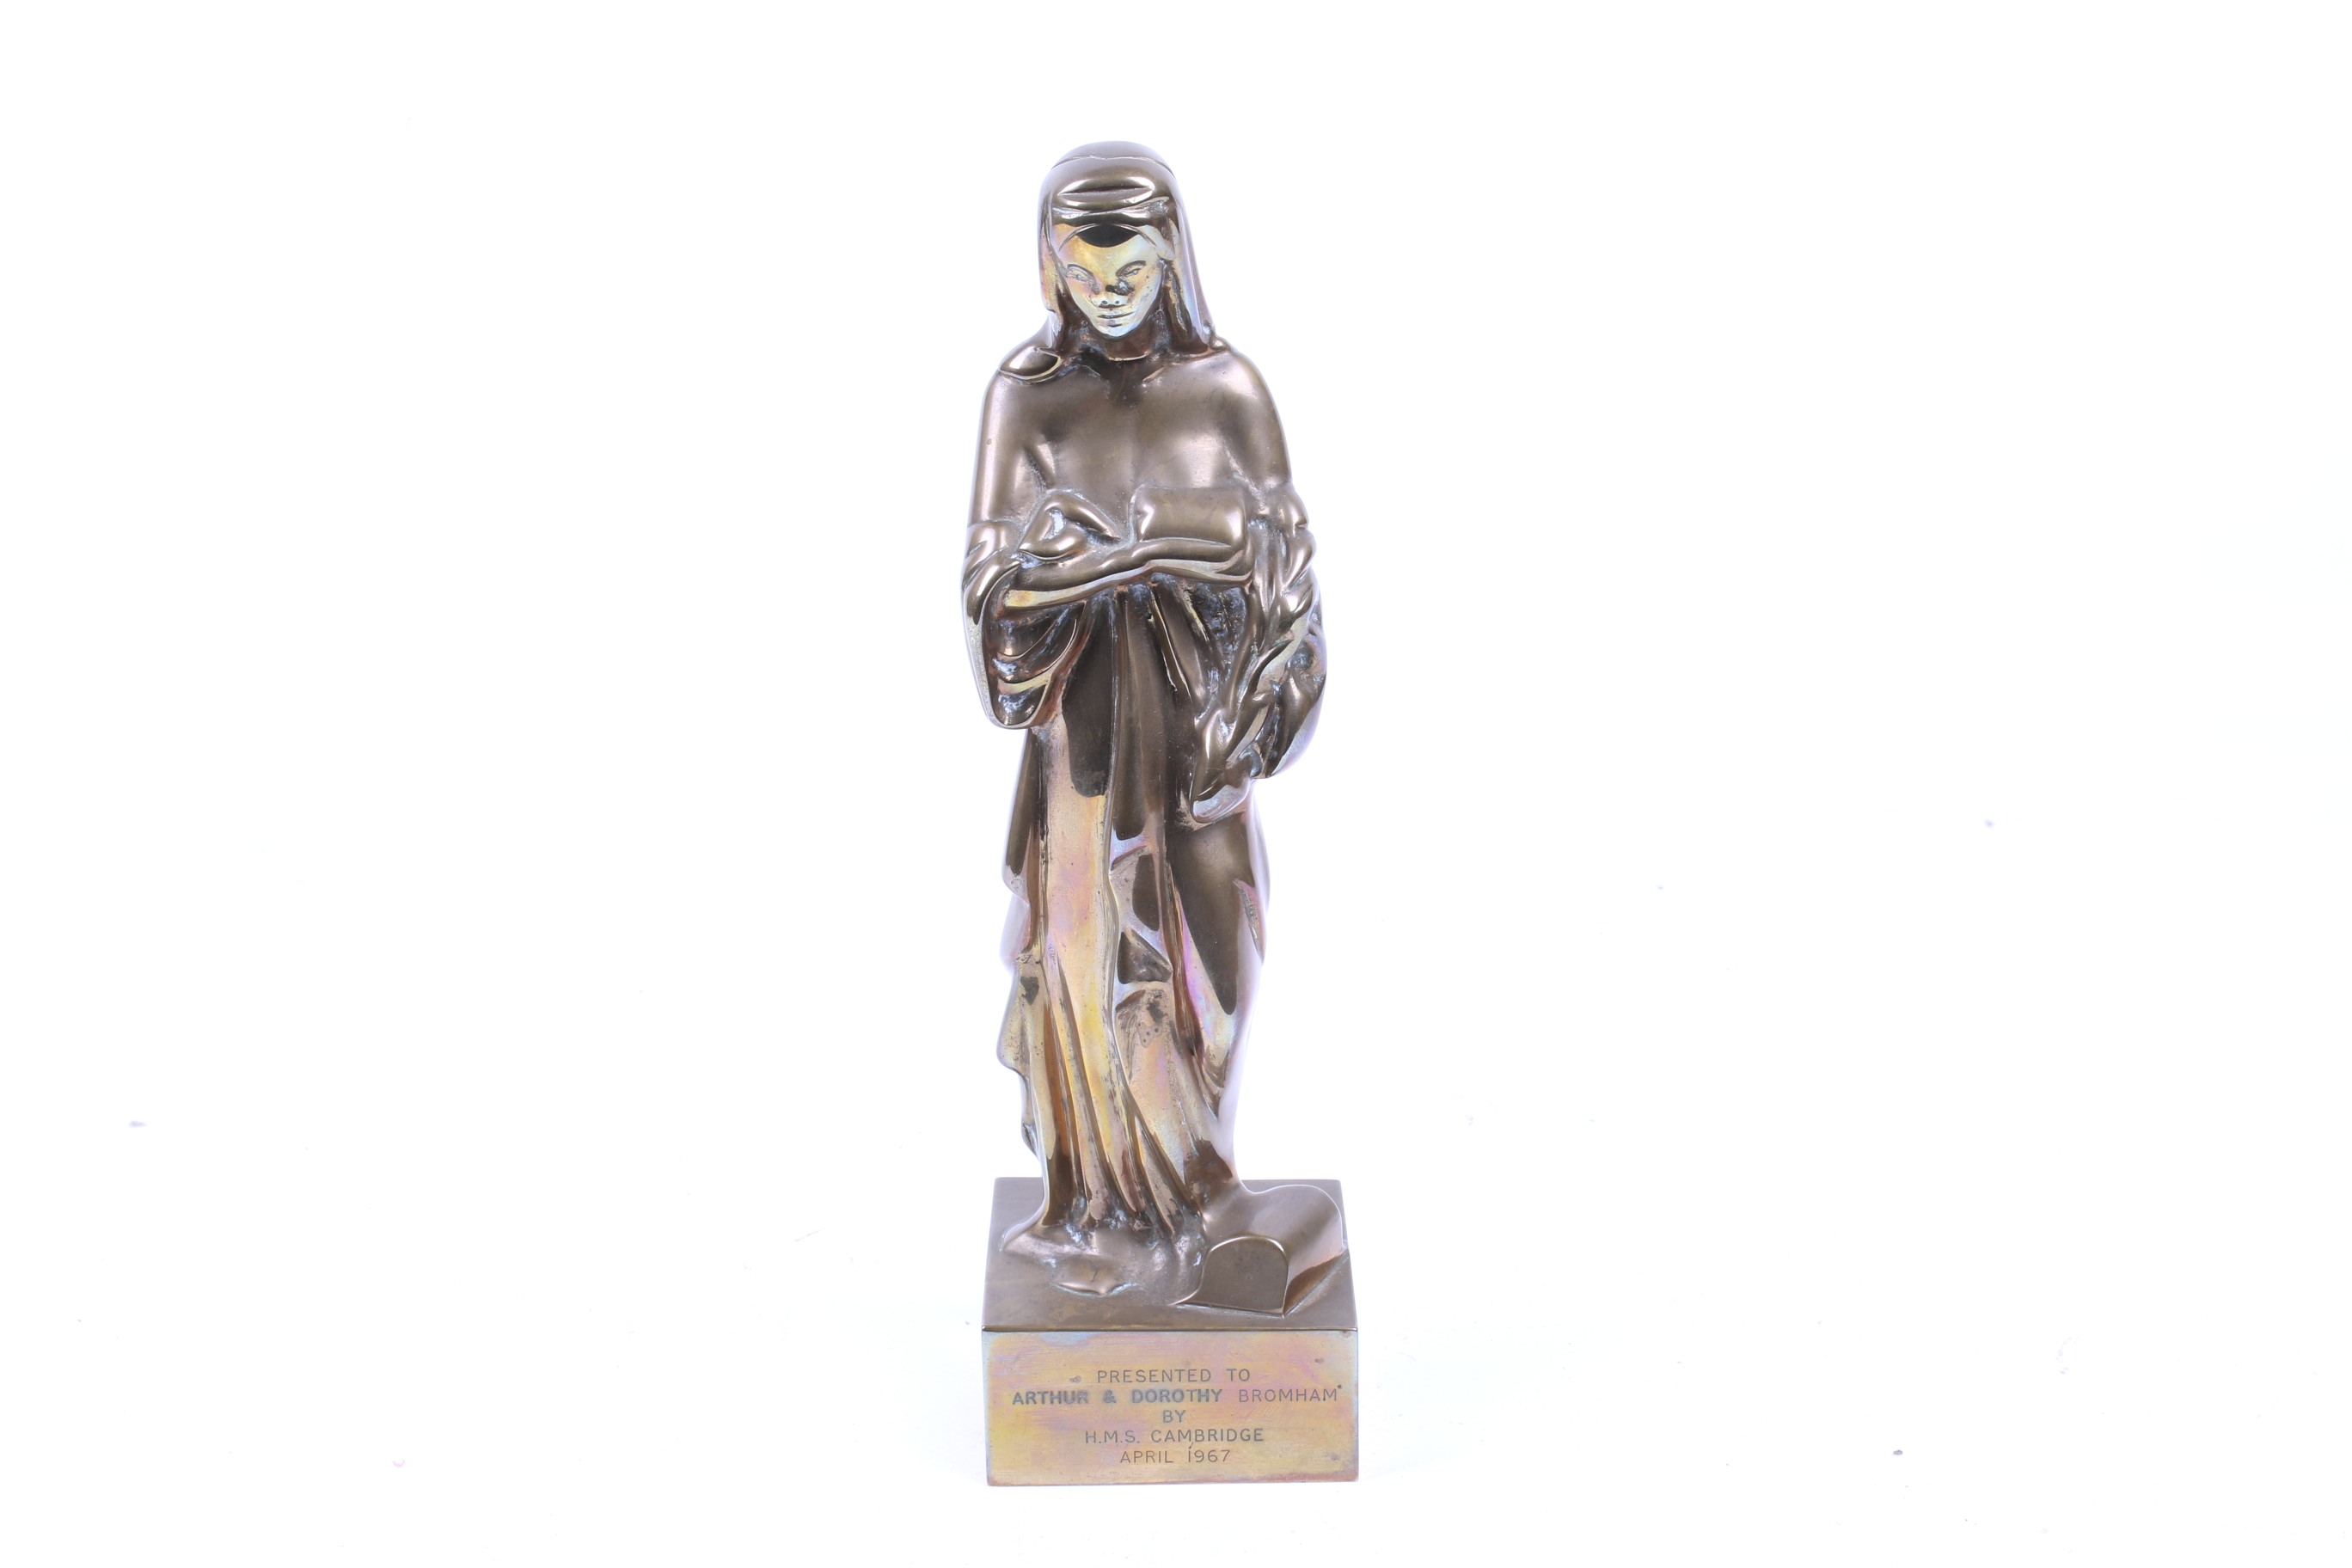 A bronze model of the Virgin Mary. Marked 'Presented to Arthur & Dorothy Bromham by H.M.S.